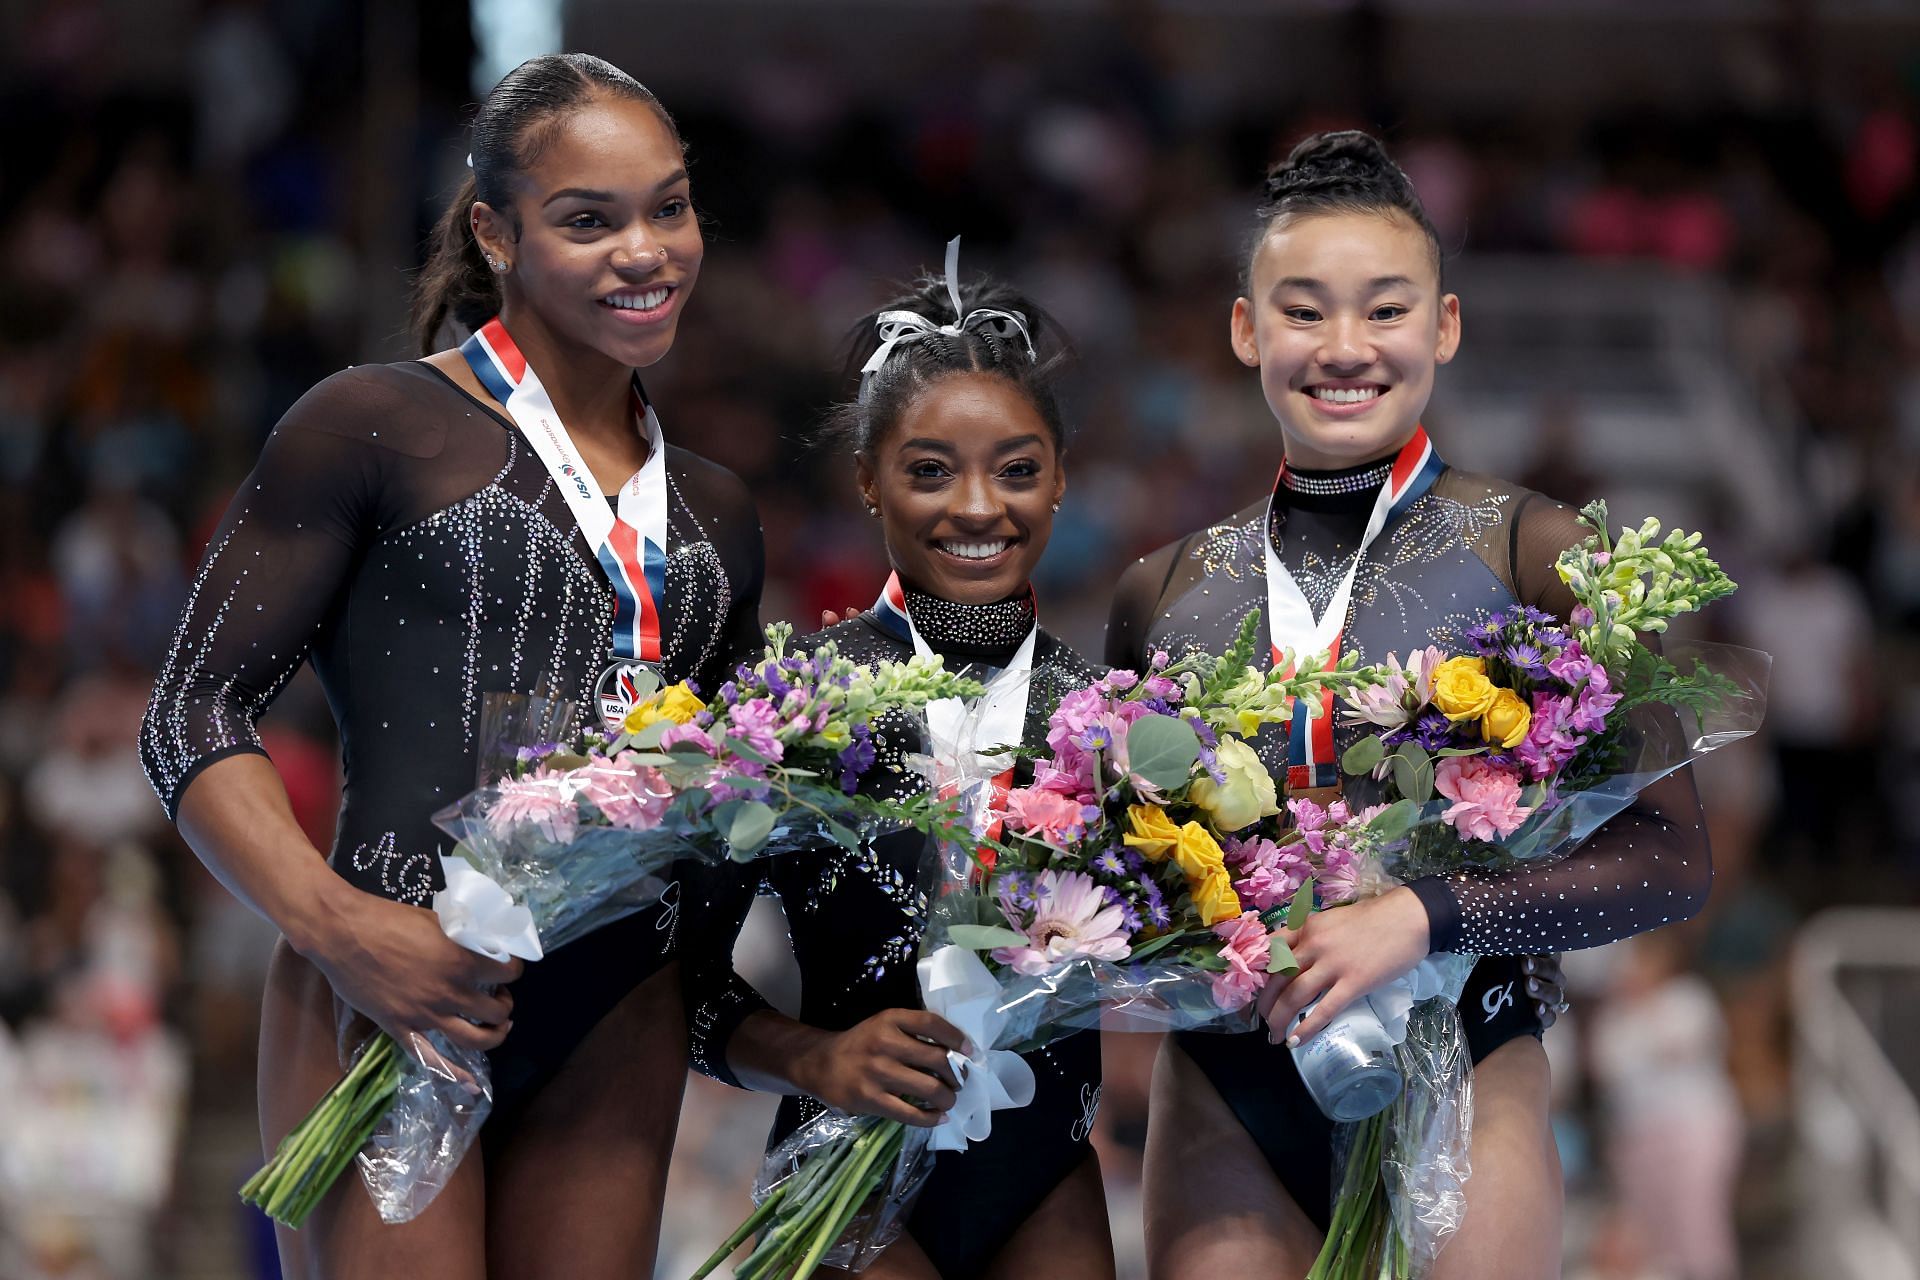 Shilese Jones, Simone Biles, and Leanne Wong pose for a photo during the 2023 U.S. Gymnastics Championships in San Jose, California